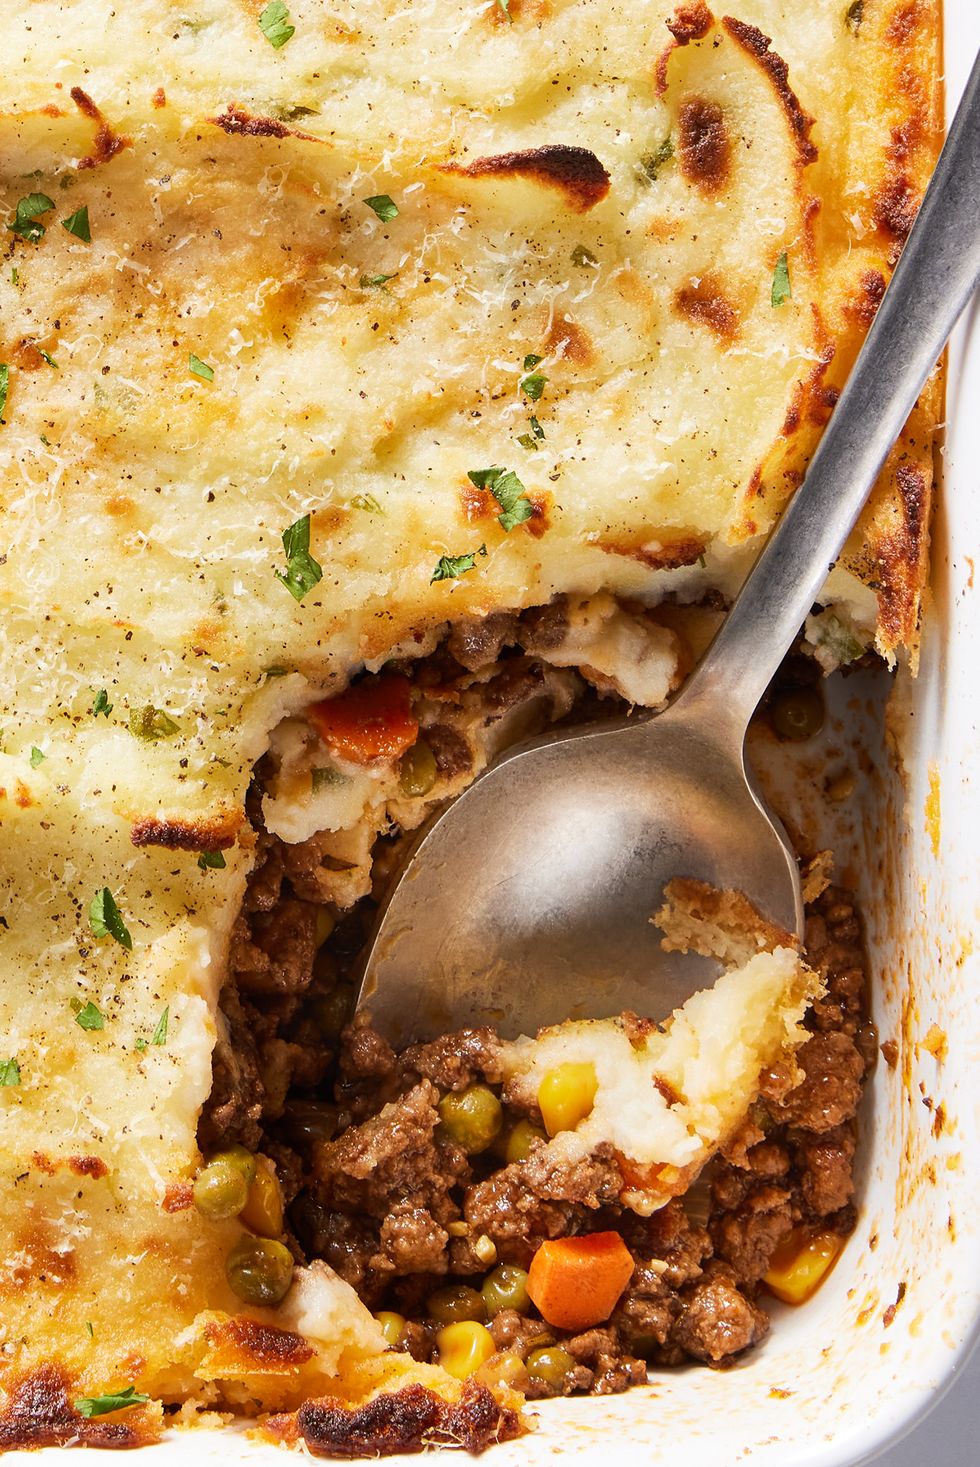 ground beef cooked with aromatics and red wine, then combined with corn and peas and covered with a blanket of velvety, rich mashed potatoes, then topped with parmesan and broiled until golden brown